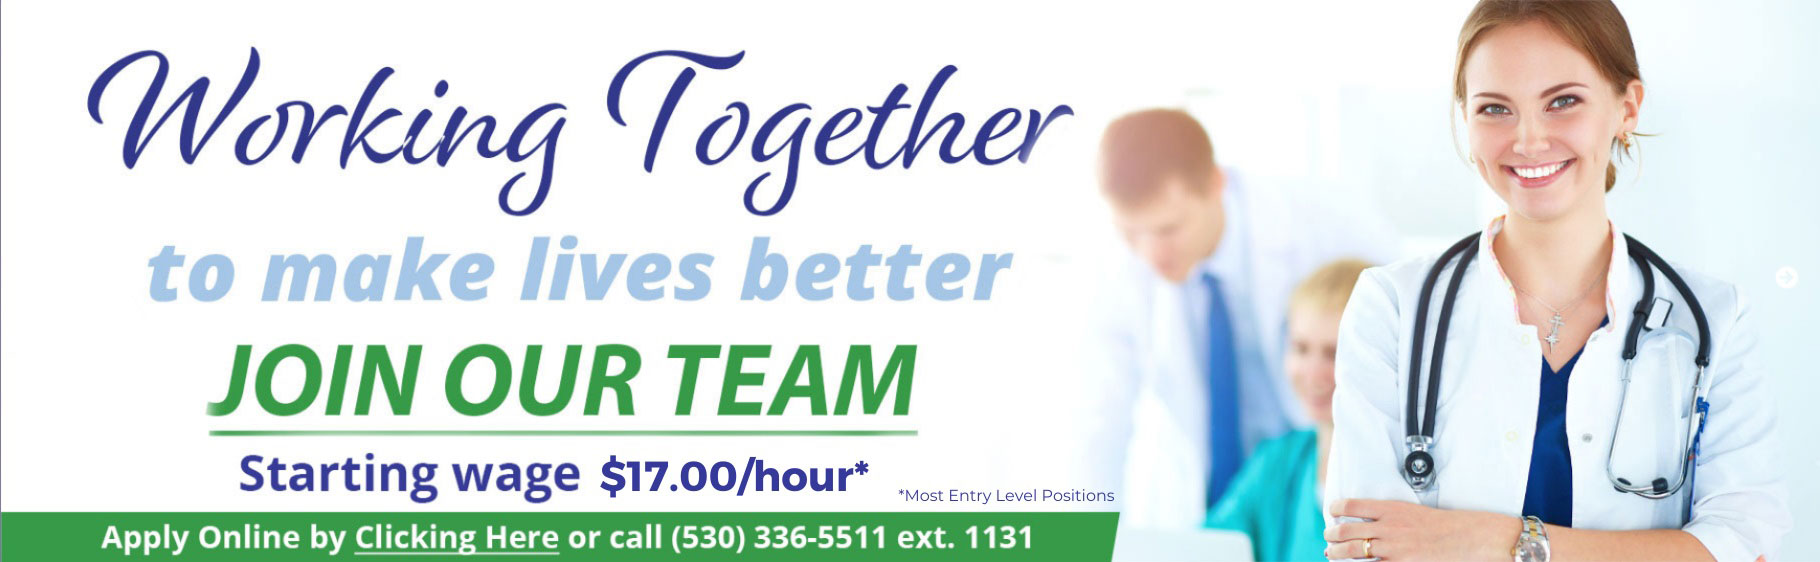 Working Together
to make lives better
JOIN OUR TEAM
Starting wage $17.OO/hour*
Apply Online by Clicking Here or call (540)366-5511 ext. 1131